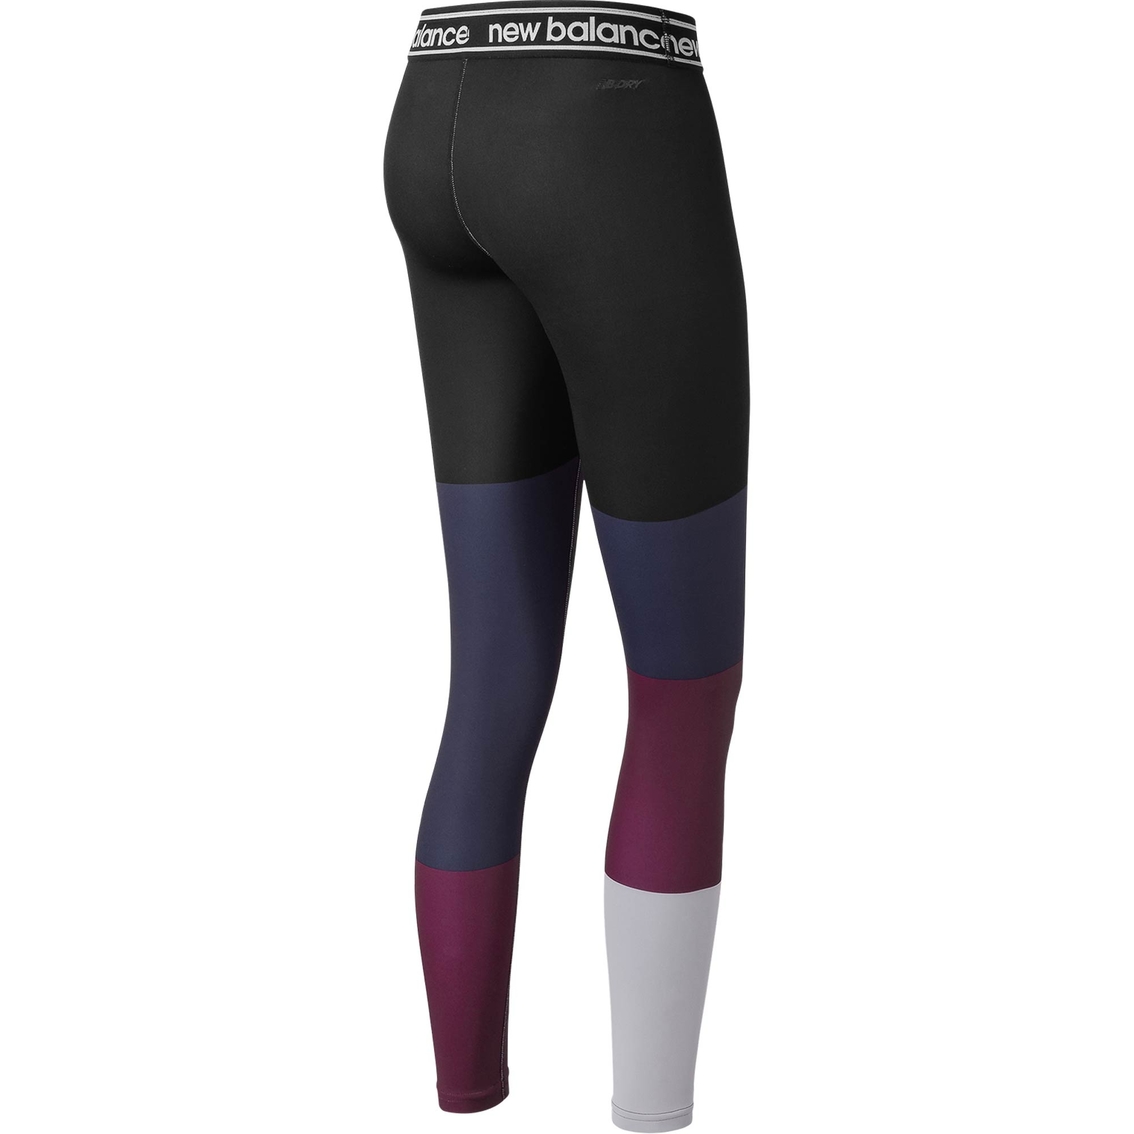 New Balance Accelerate Tights - Image 2 of 2